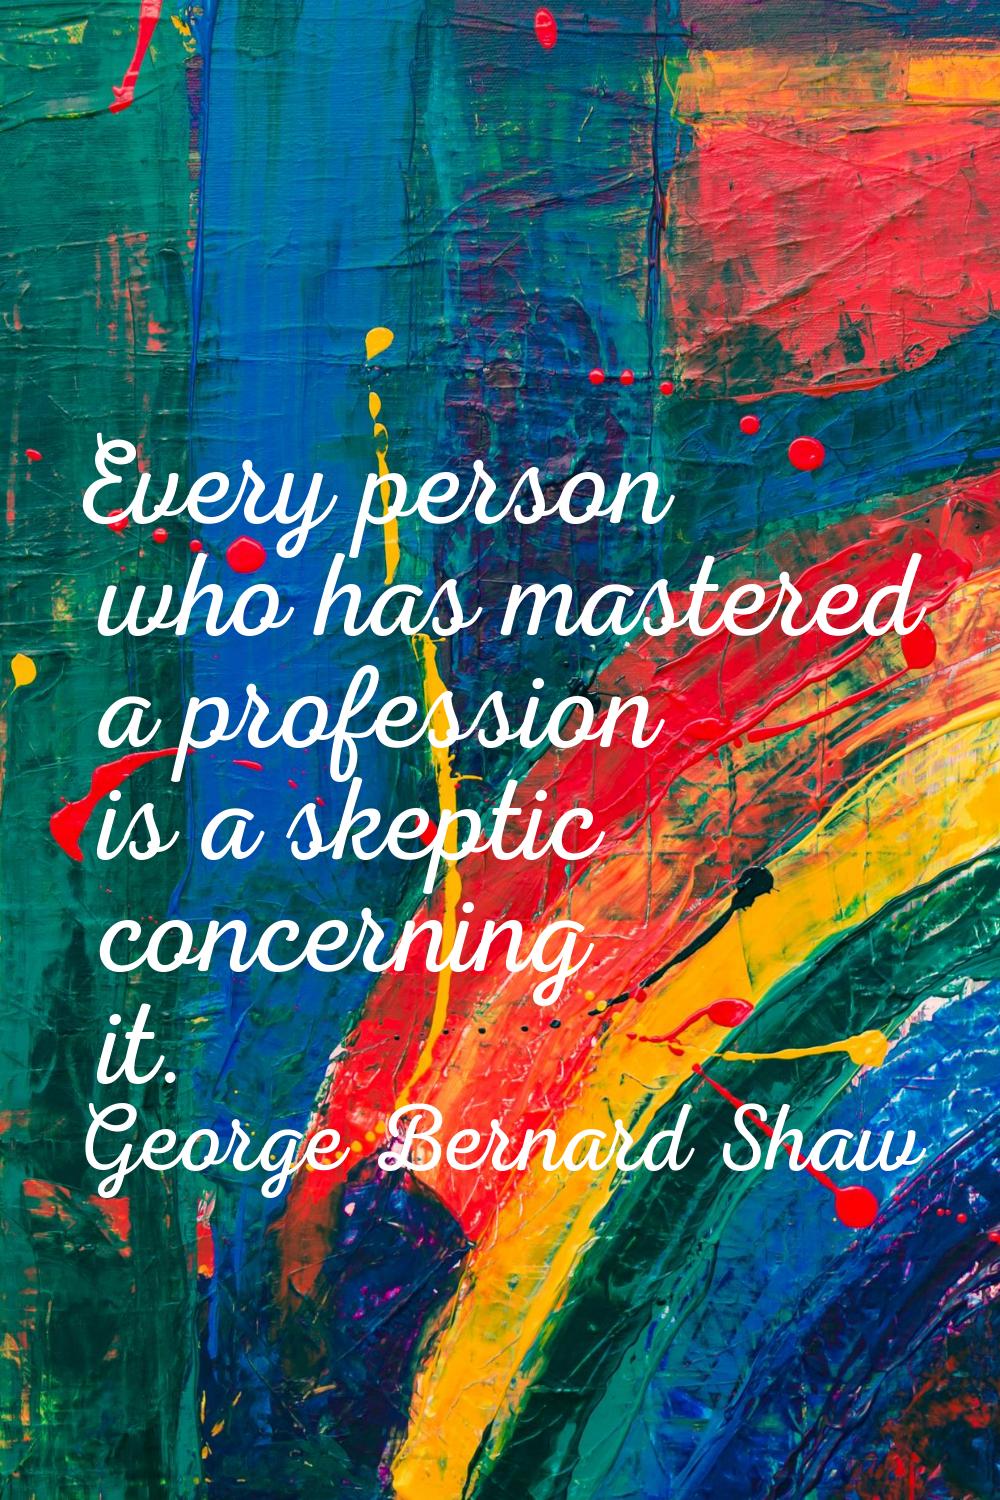 Every person who has mastered a profession is a skeptic concerning it.